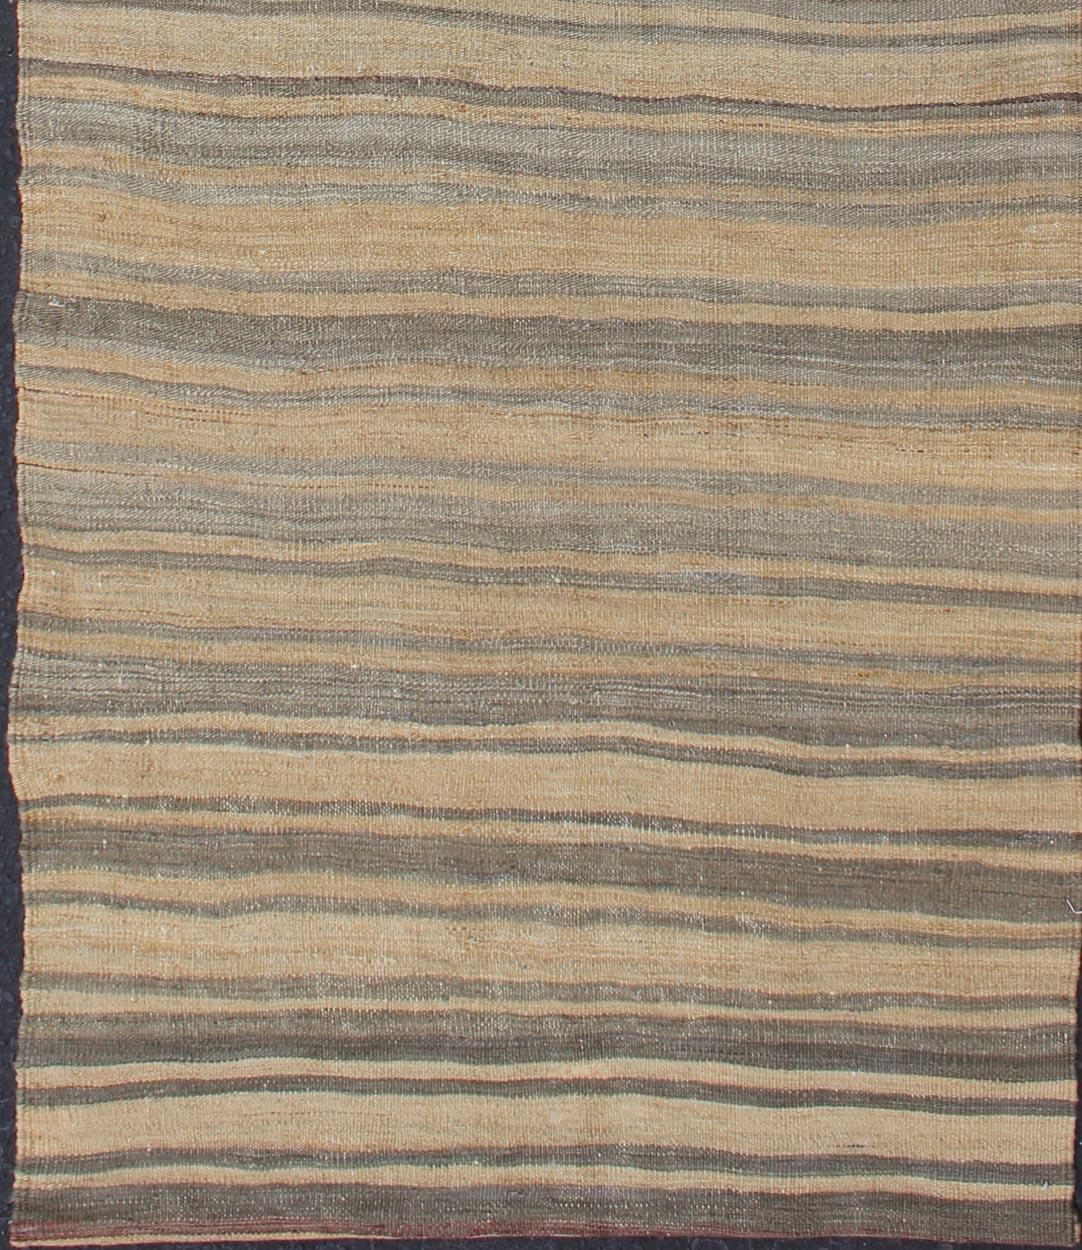 Hand-Woven Vintage Turkish Kilim Runner with Stripes in Light Tan and Neutral Tones For Sale